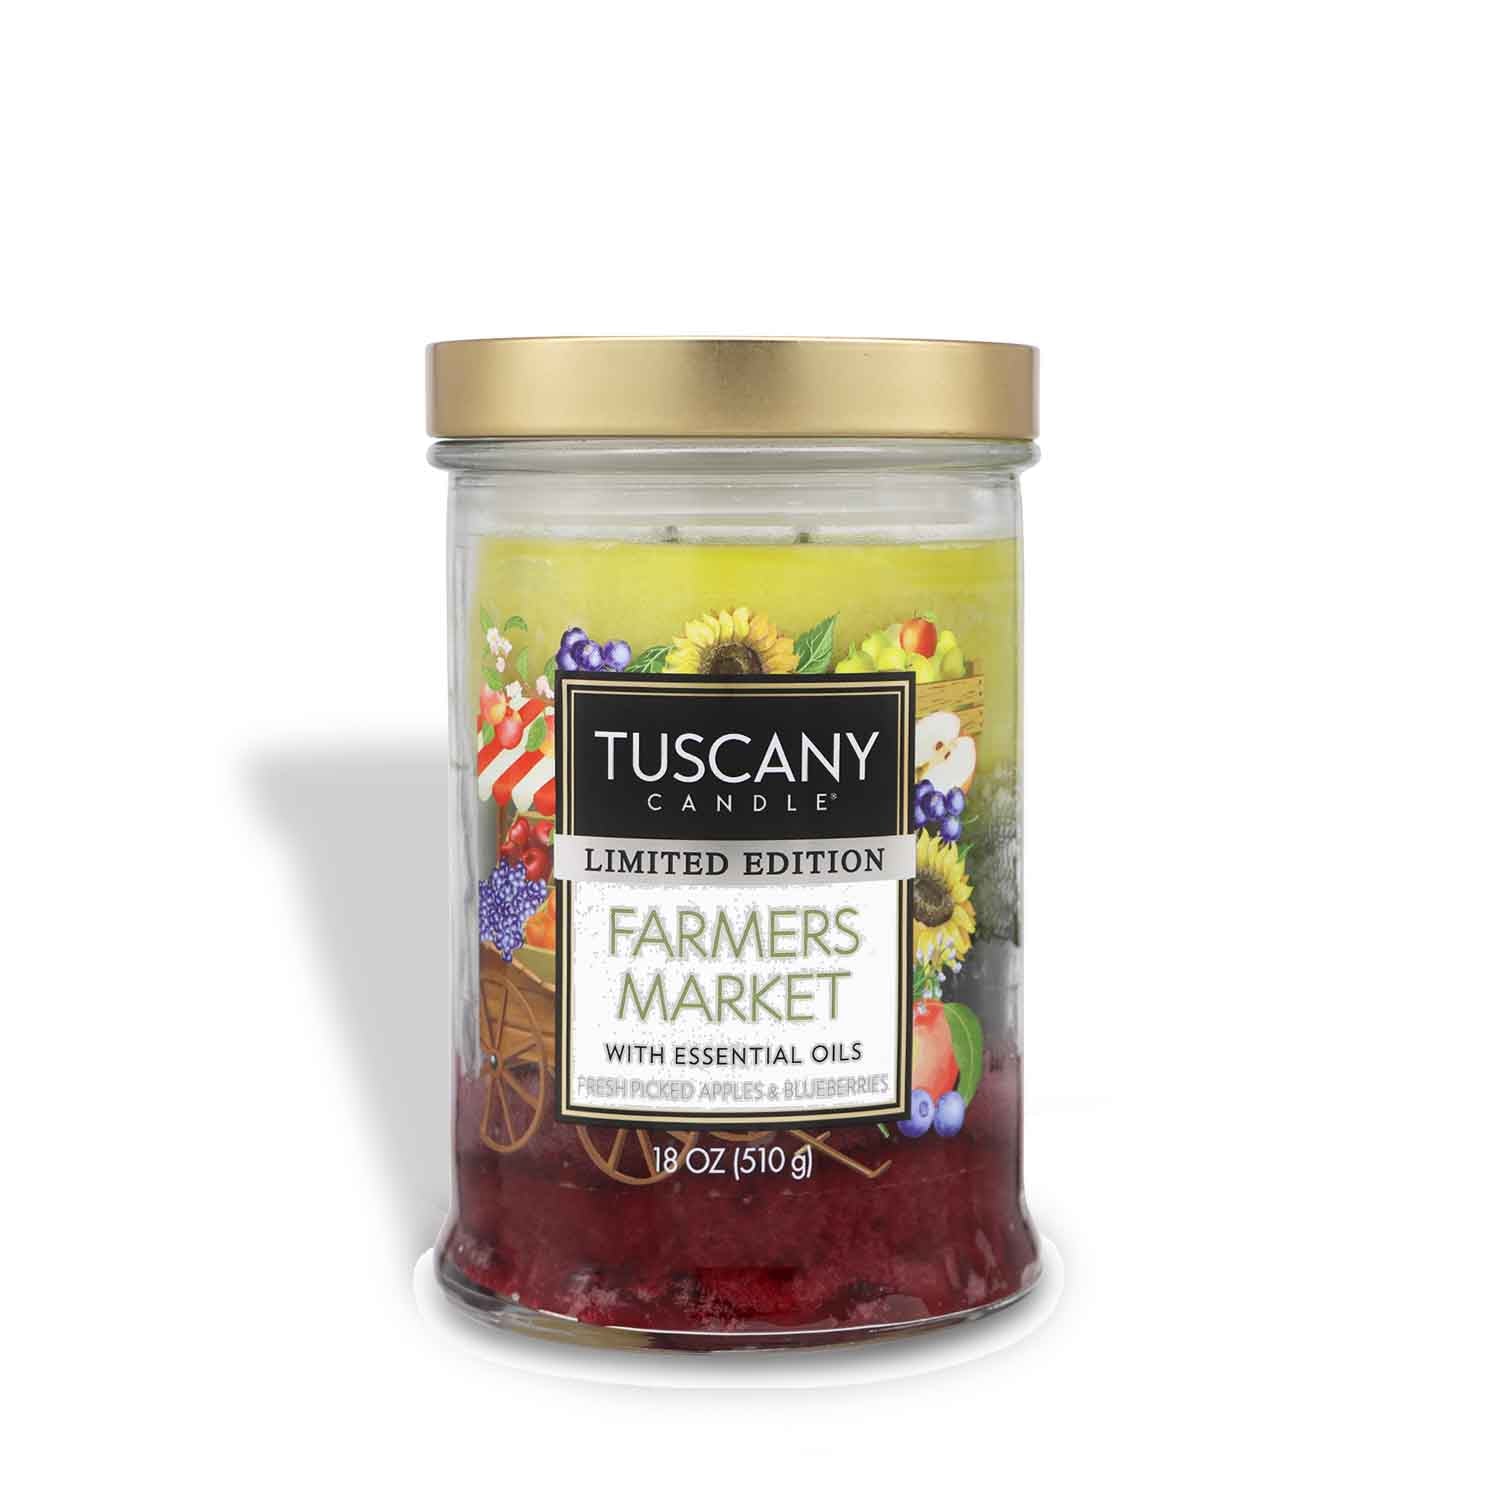 Farmer's Market - A 3-colored scented candle from Tuscany Candle's Triple-poured collection, which features layers of colored wax in a tall glass jar